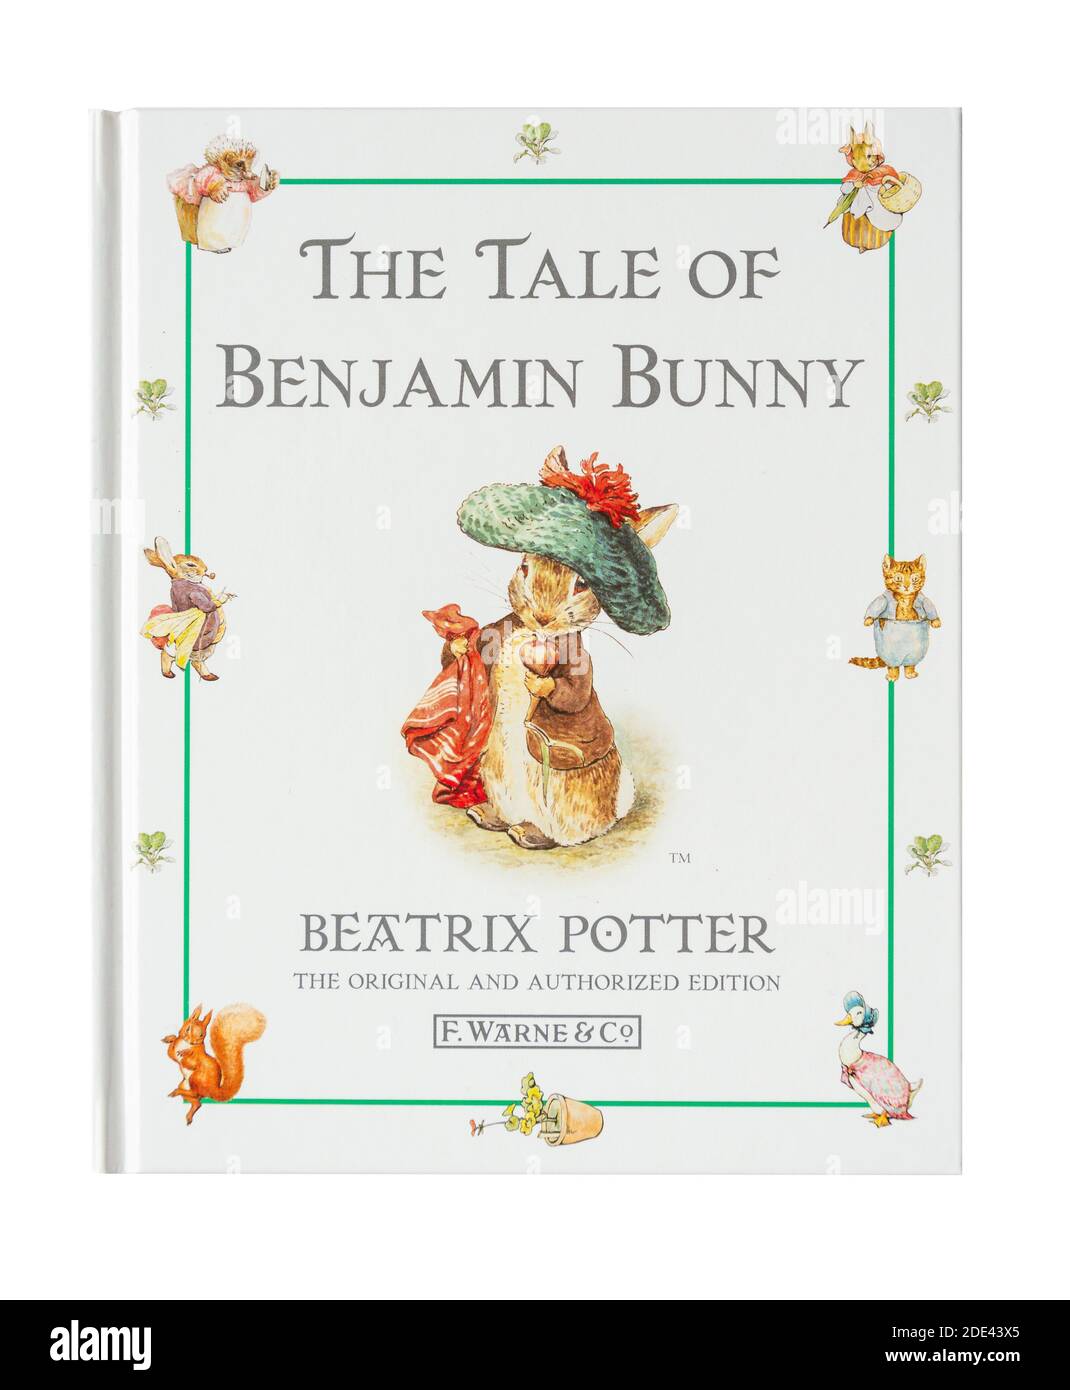 'The Tale of Benjamin Bunny' children's book by Beatrix Potter, Greater London, England, United Kingdom Stock Photo